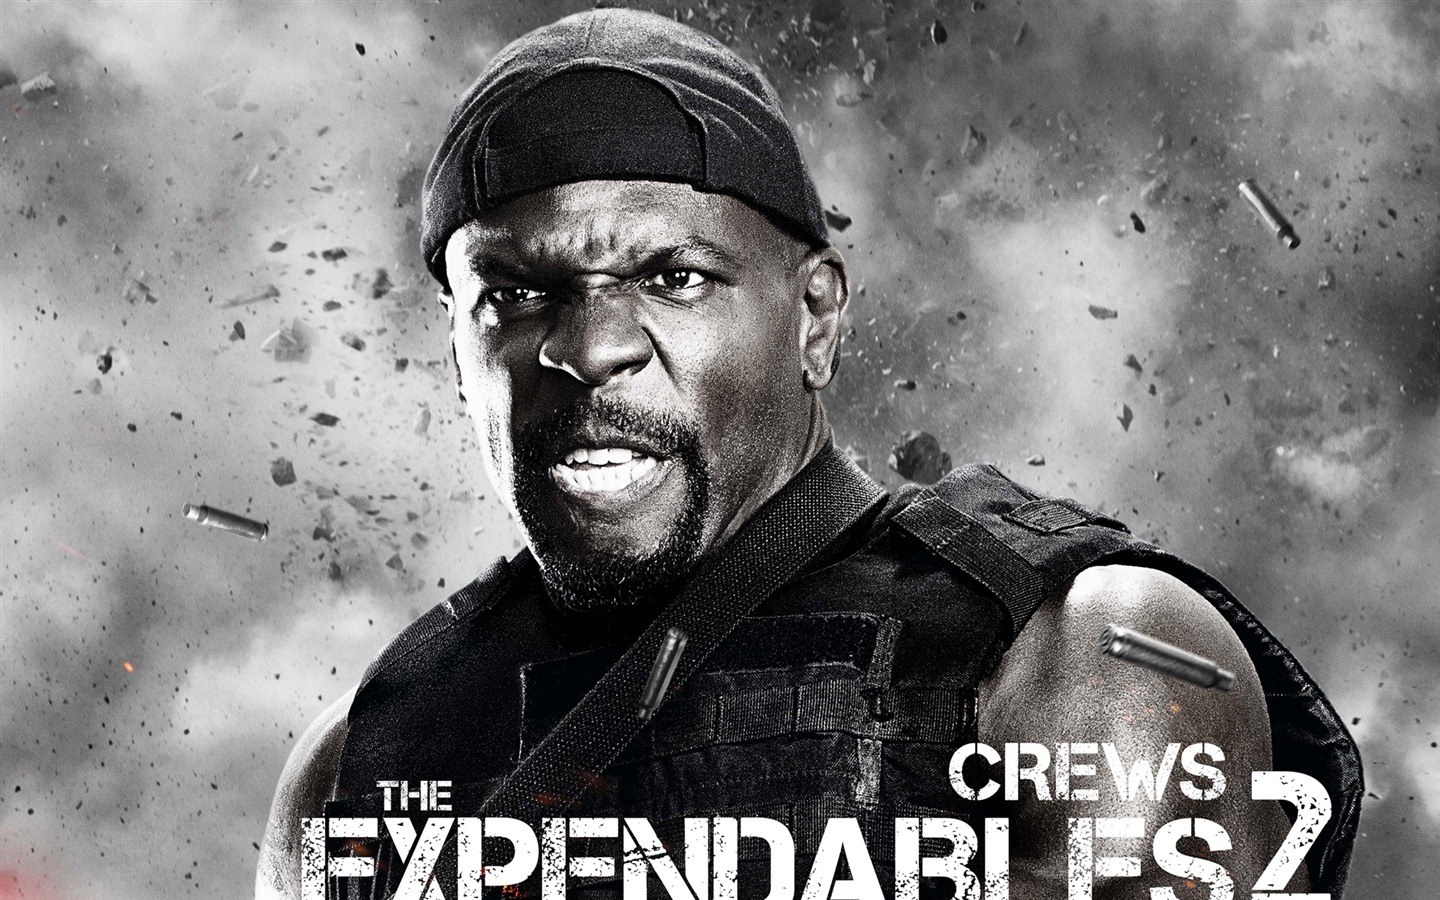 2012 Expendables2 HDの壁紙 #10 - 1440x900